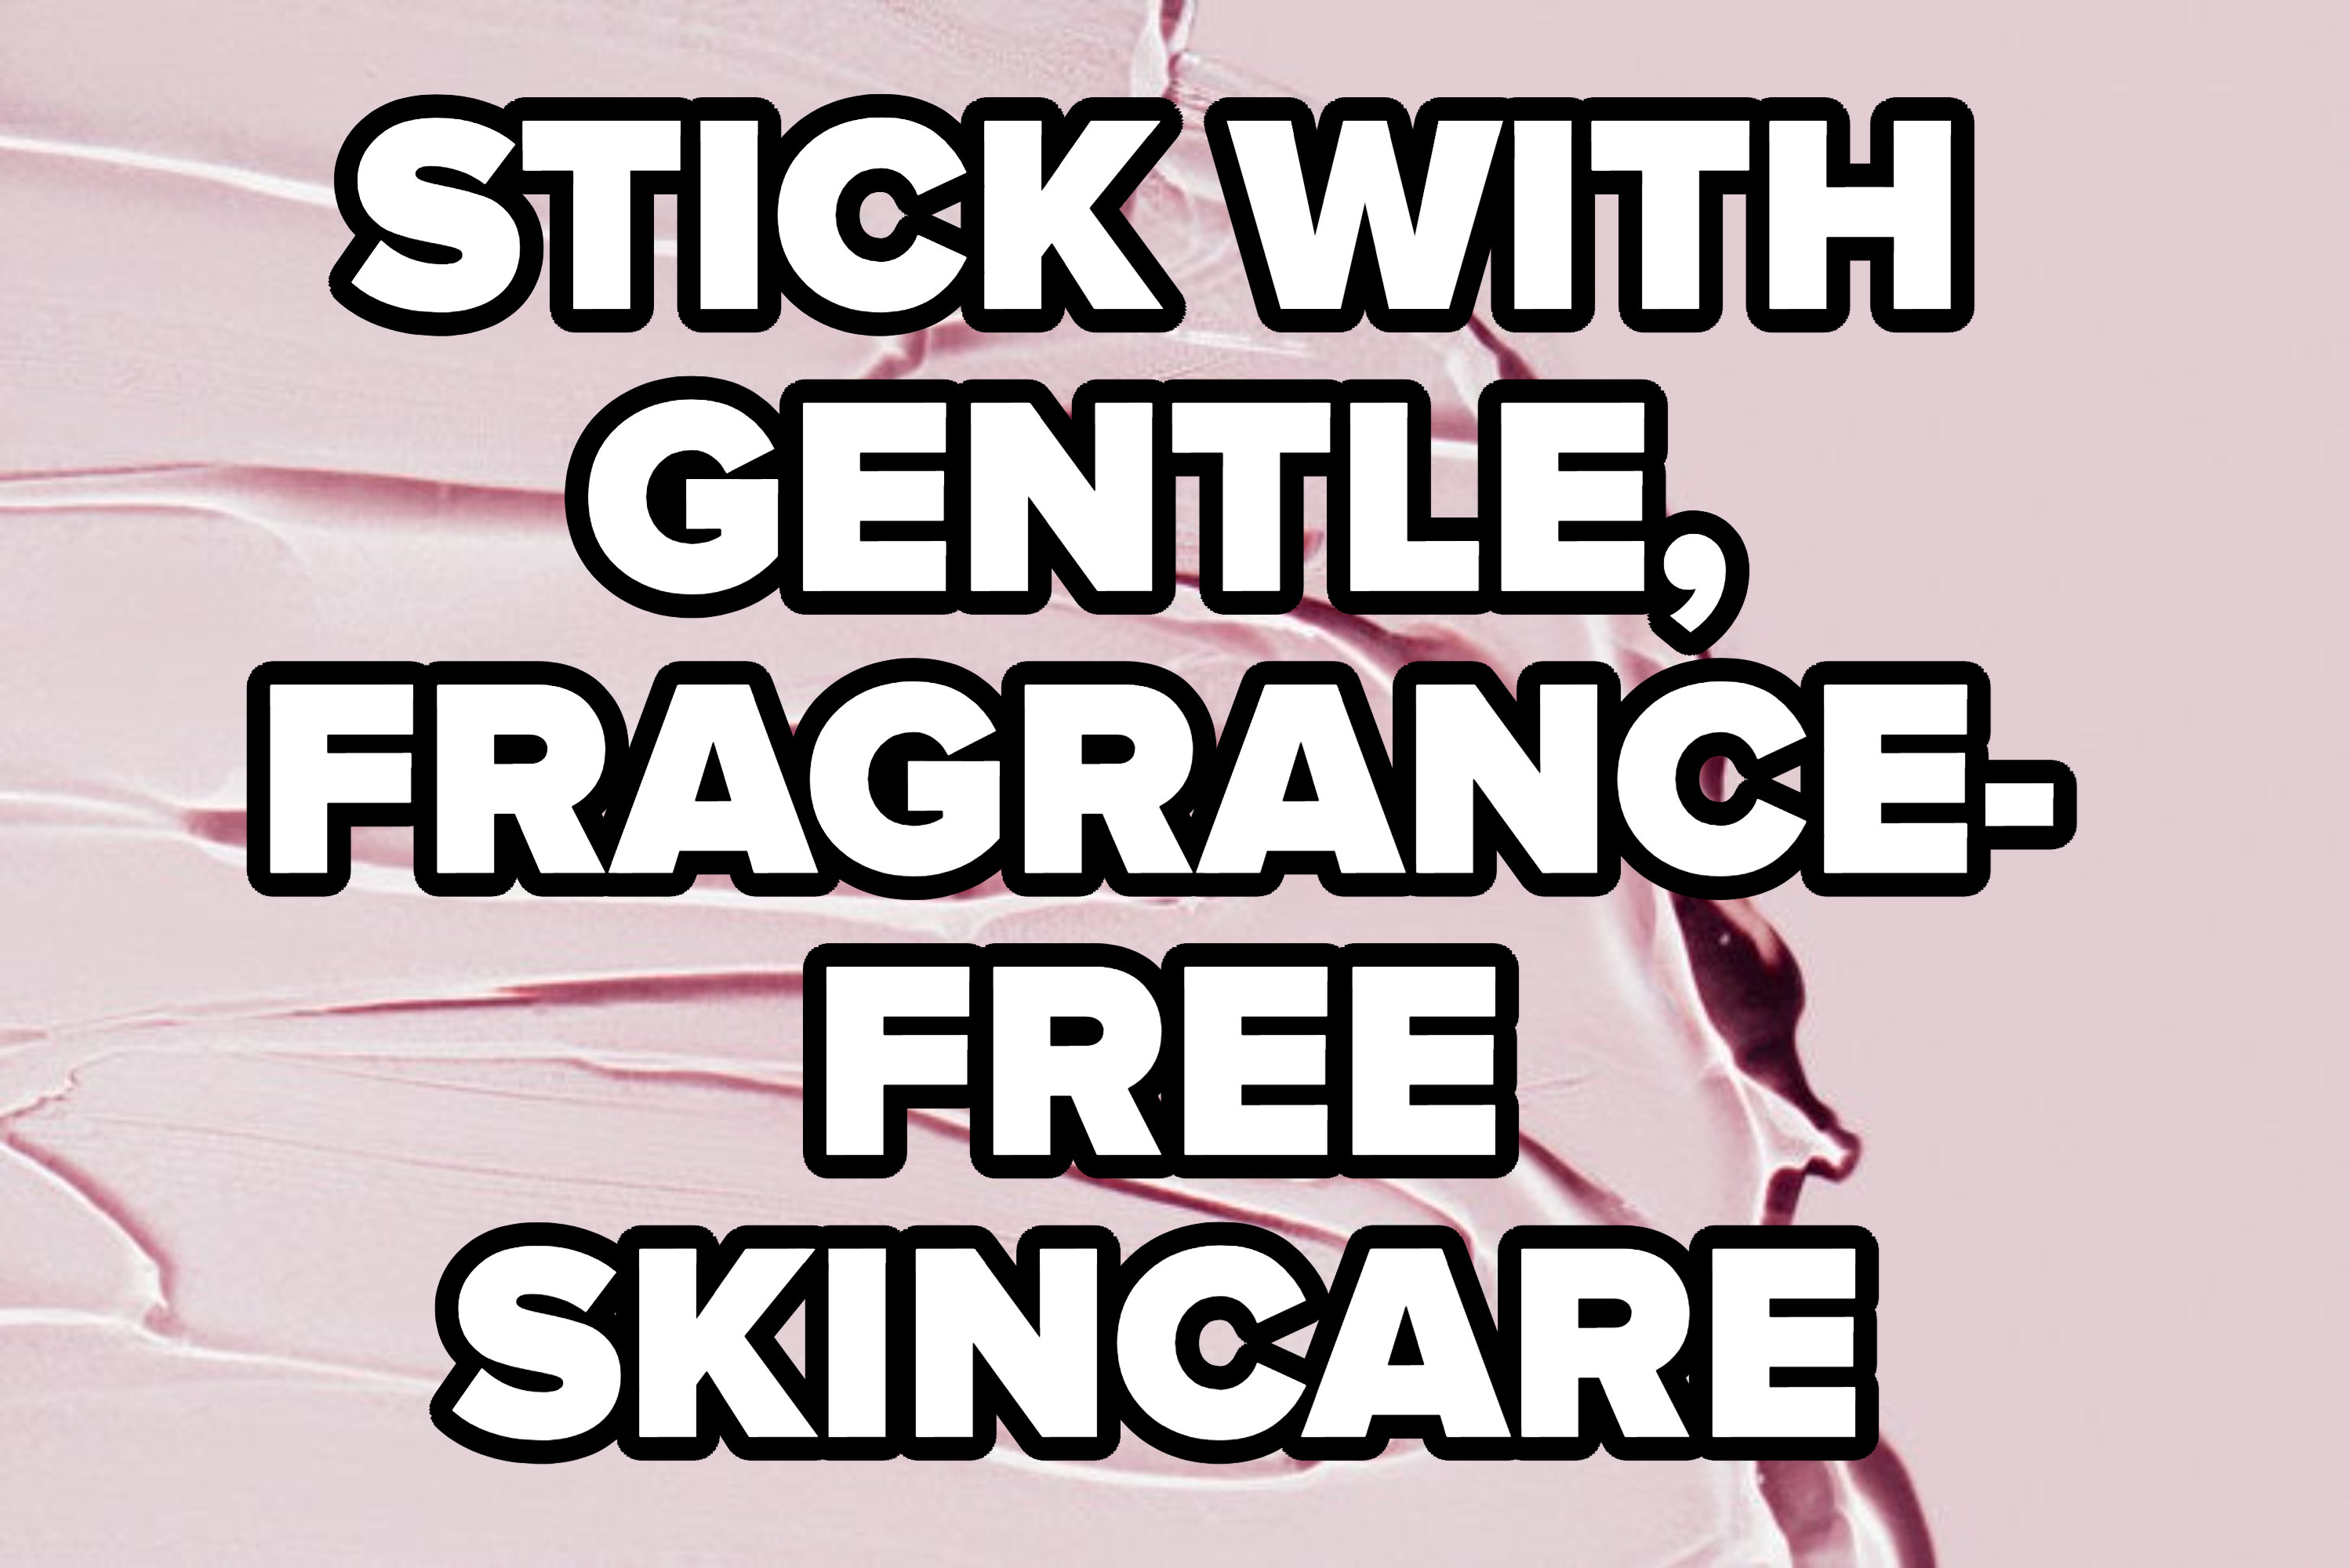 &quot;STICK WITH GENTLE, FRAGRANCE-FREE SKINCARE&quot;